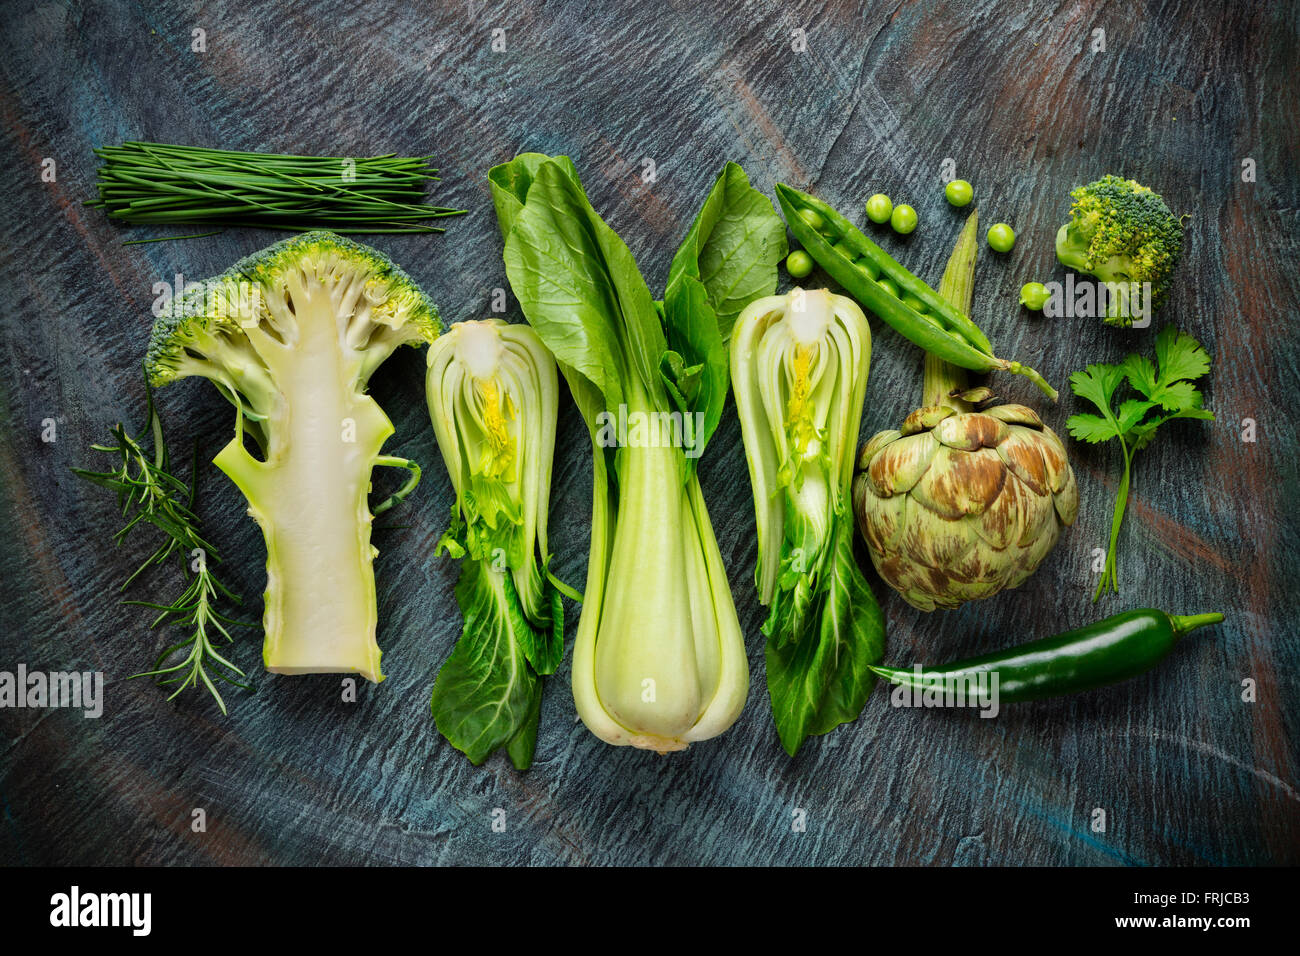 Collection of fresh green vegetables on black stone Stock Photo